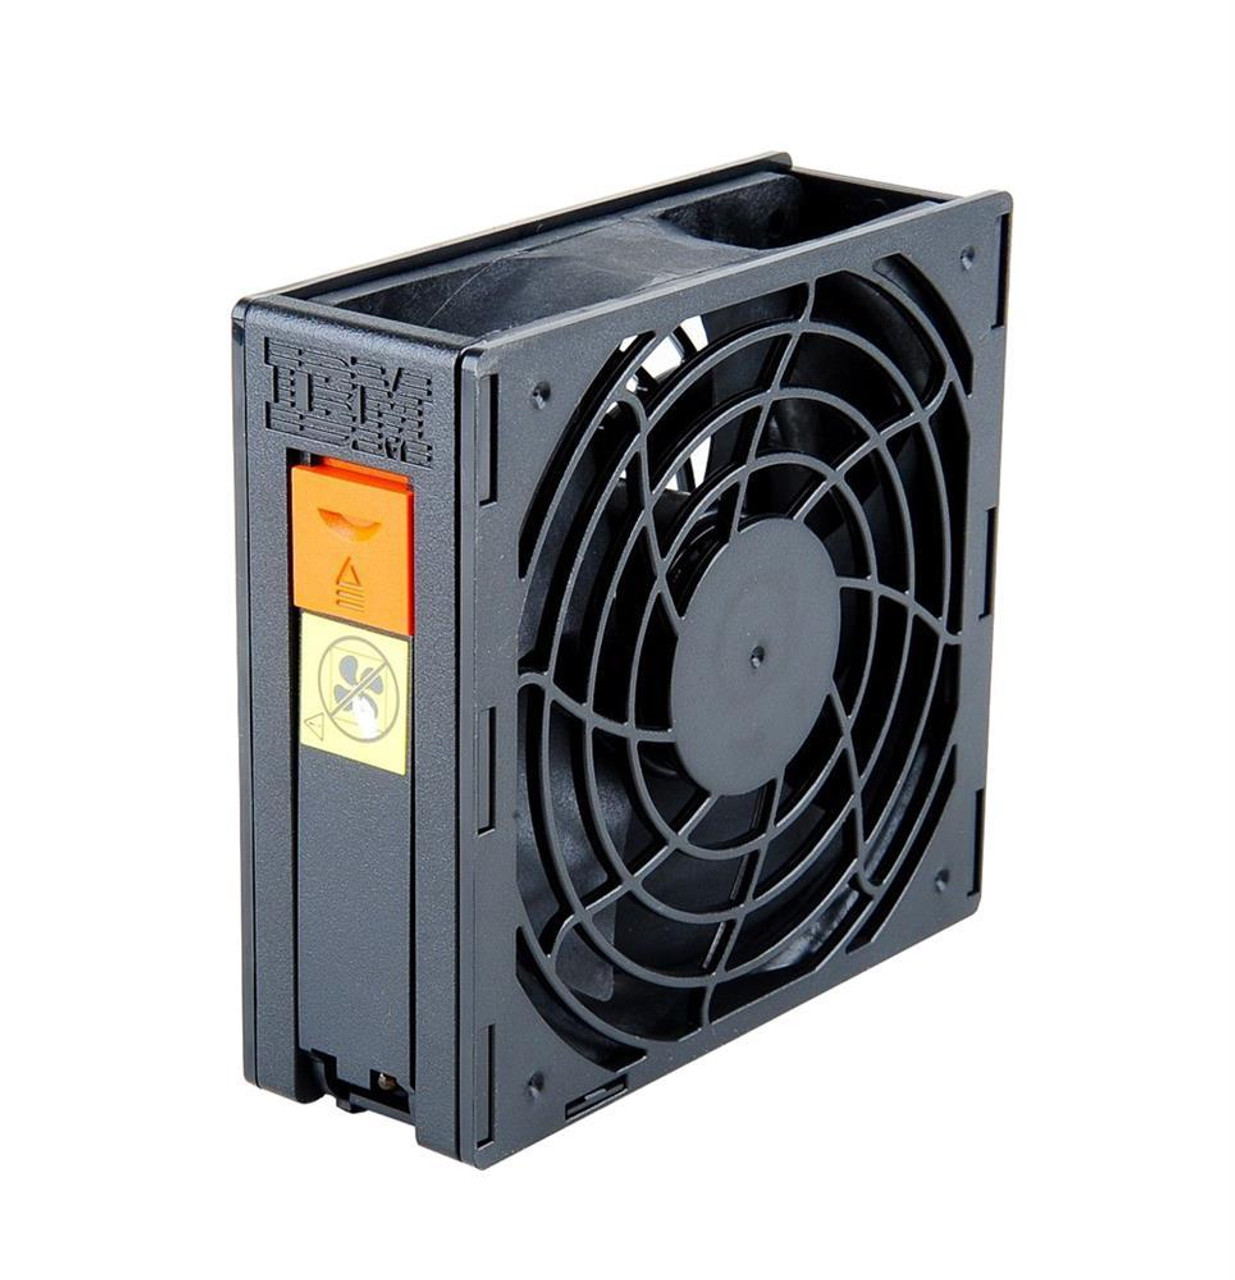 46D033802 IBM 120MM System Fan for x3500/x3400